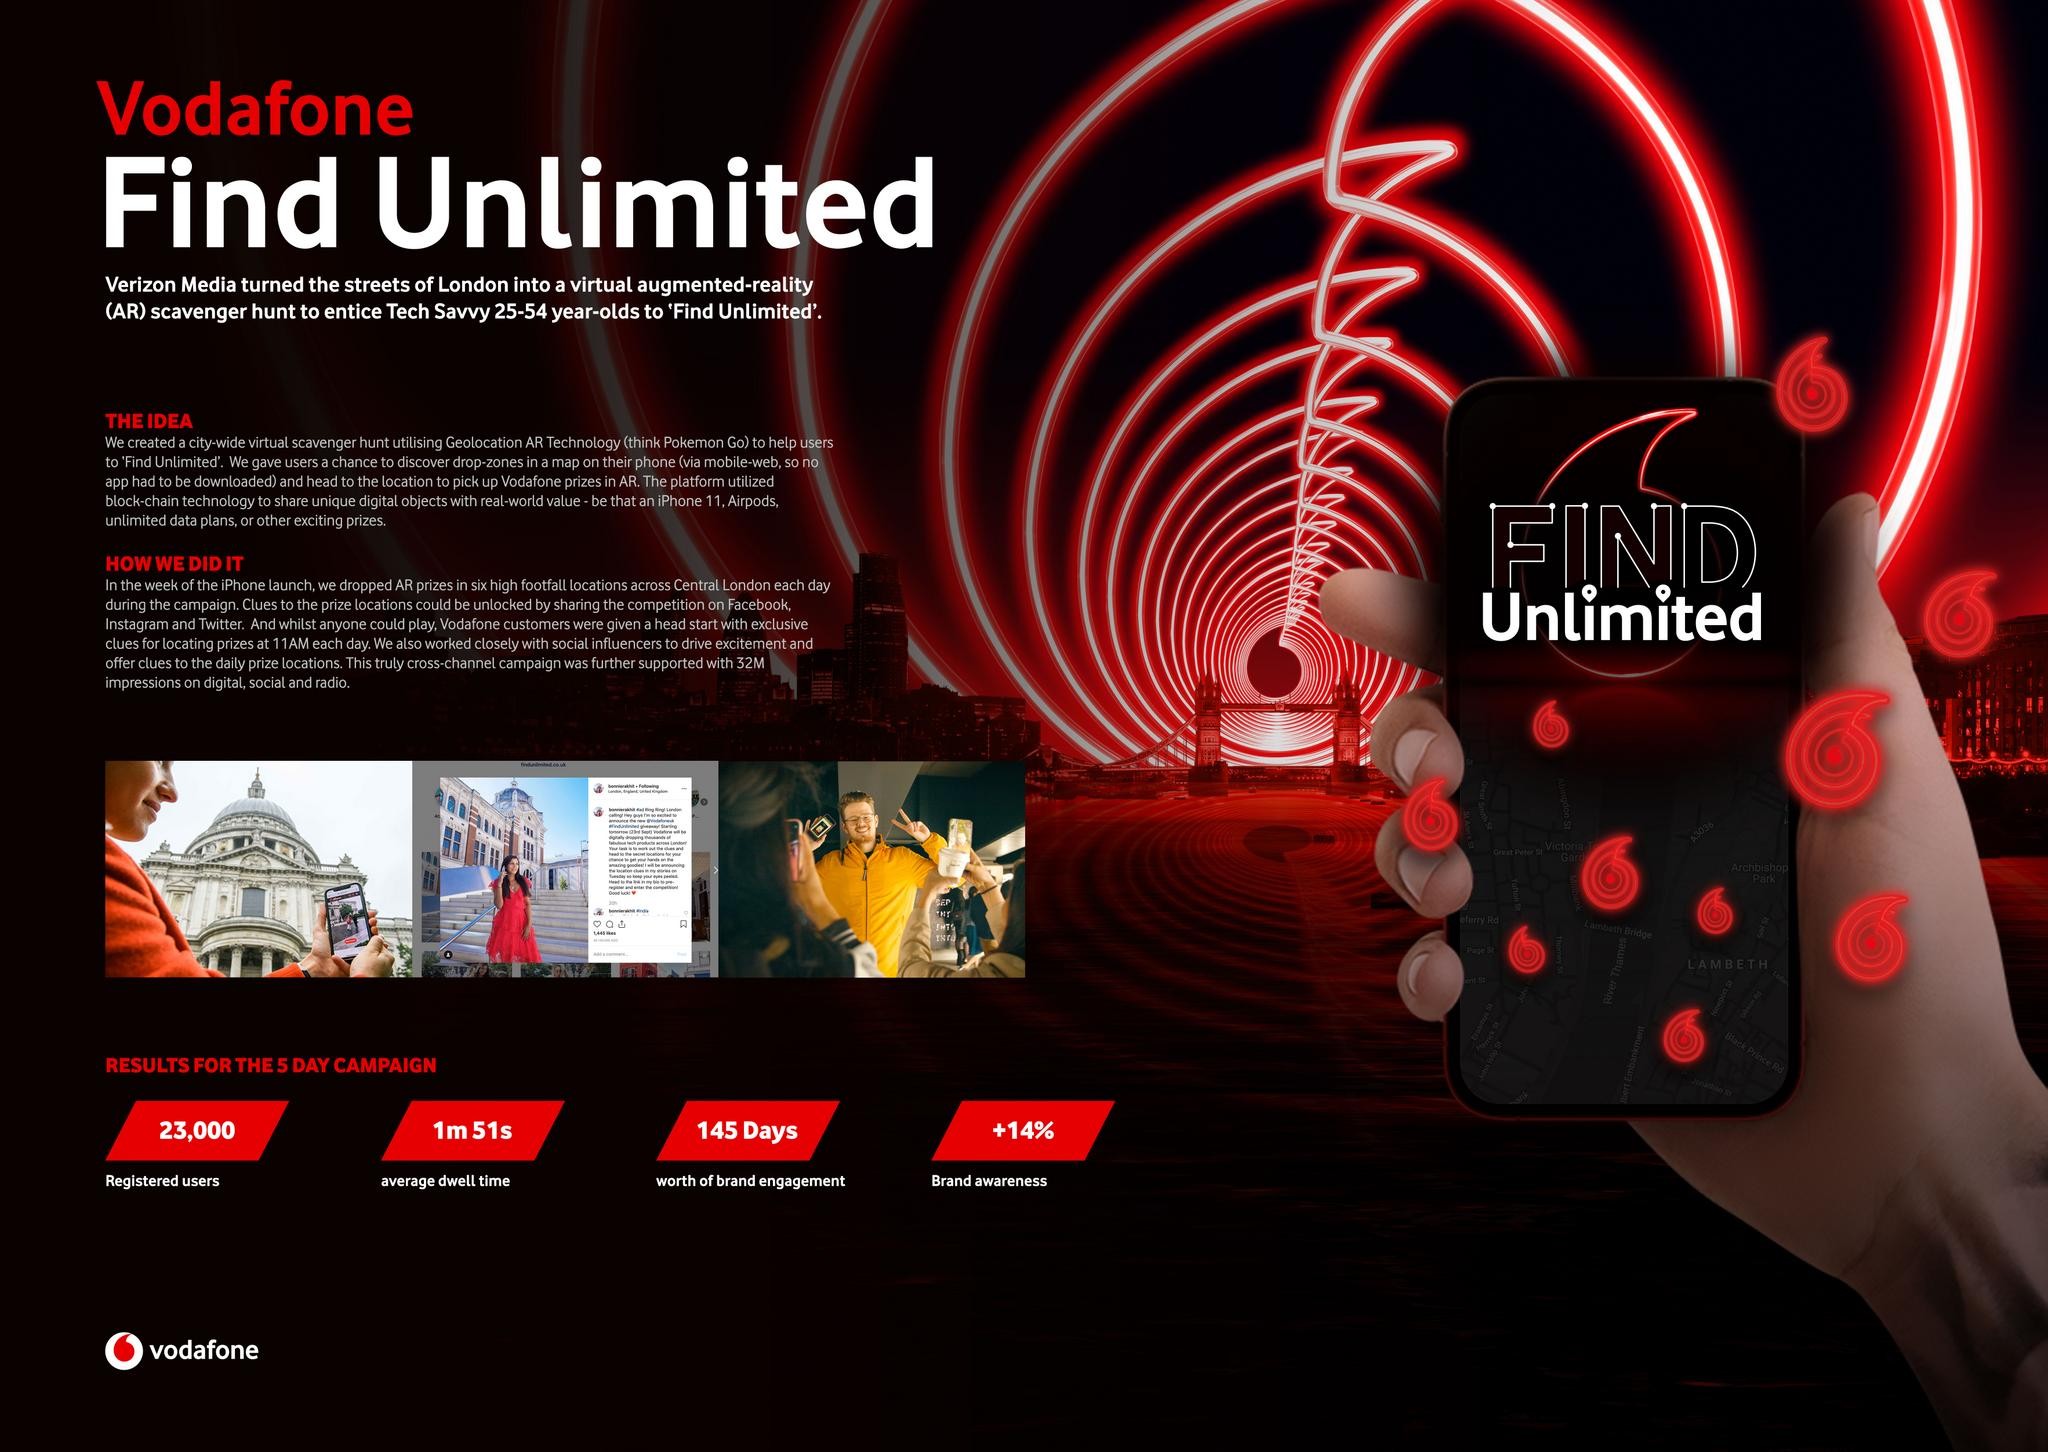 Vodafone Find Unlimited